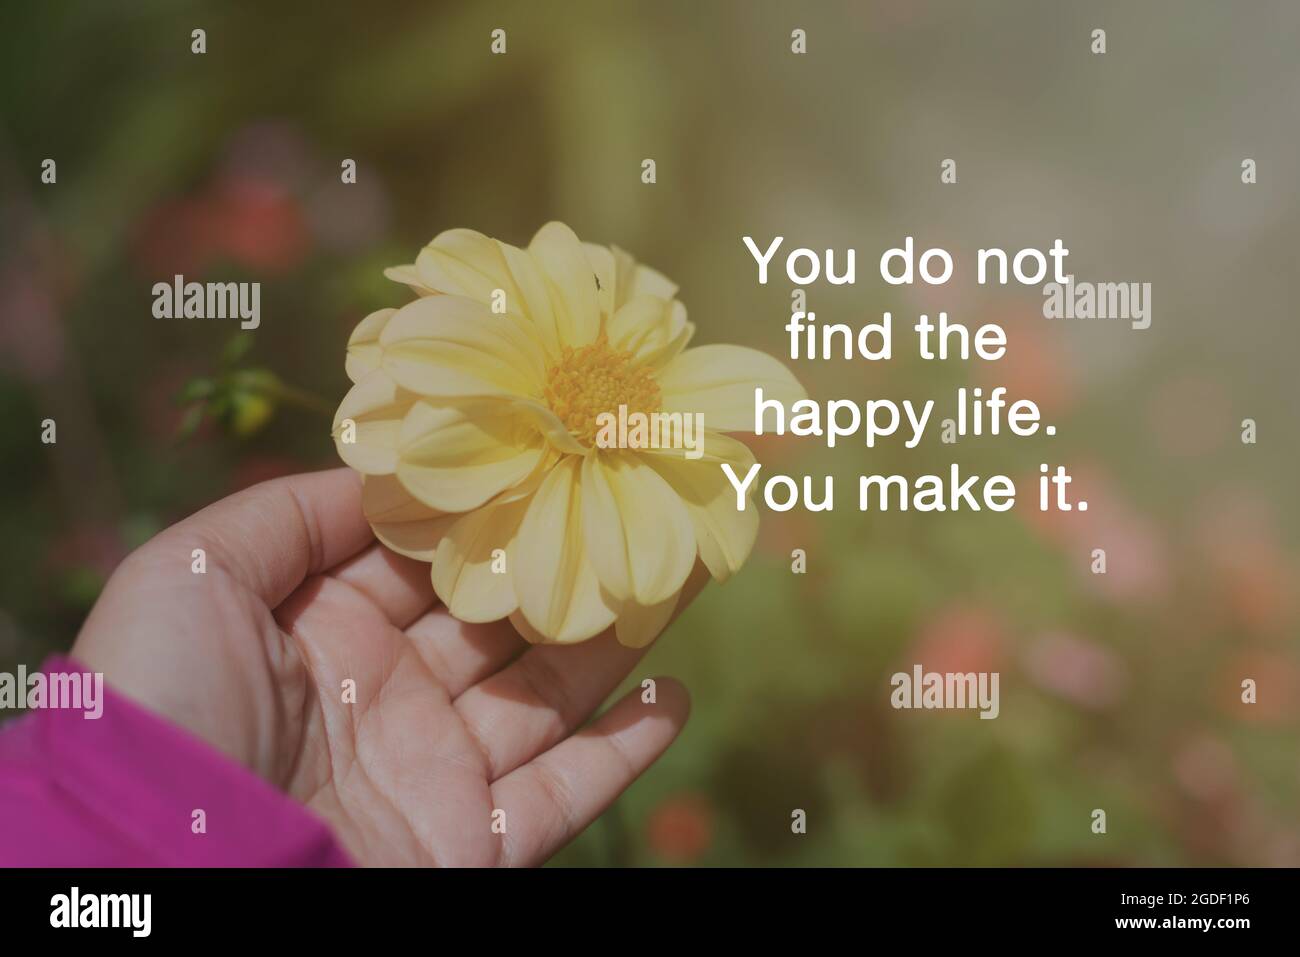 Motivational and Inspirational Quotes - You do not find the happy ...